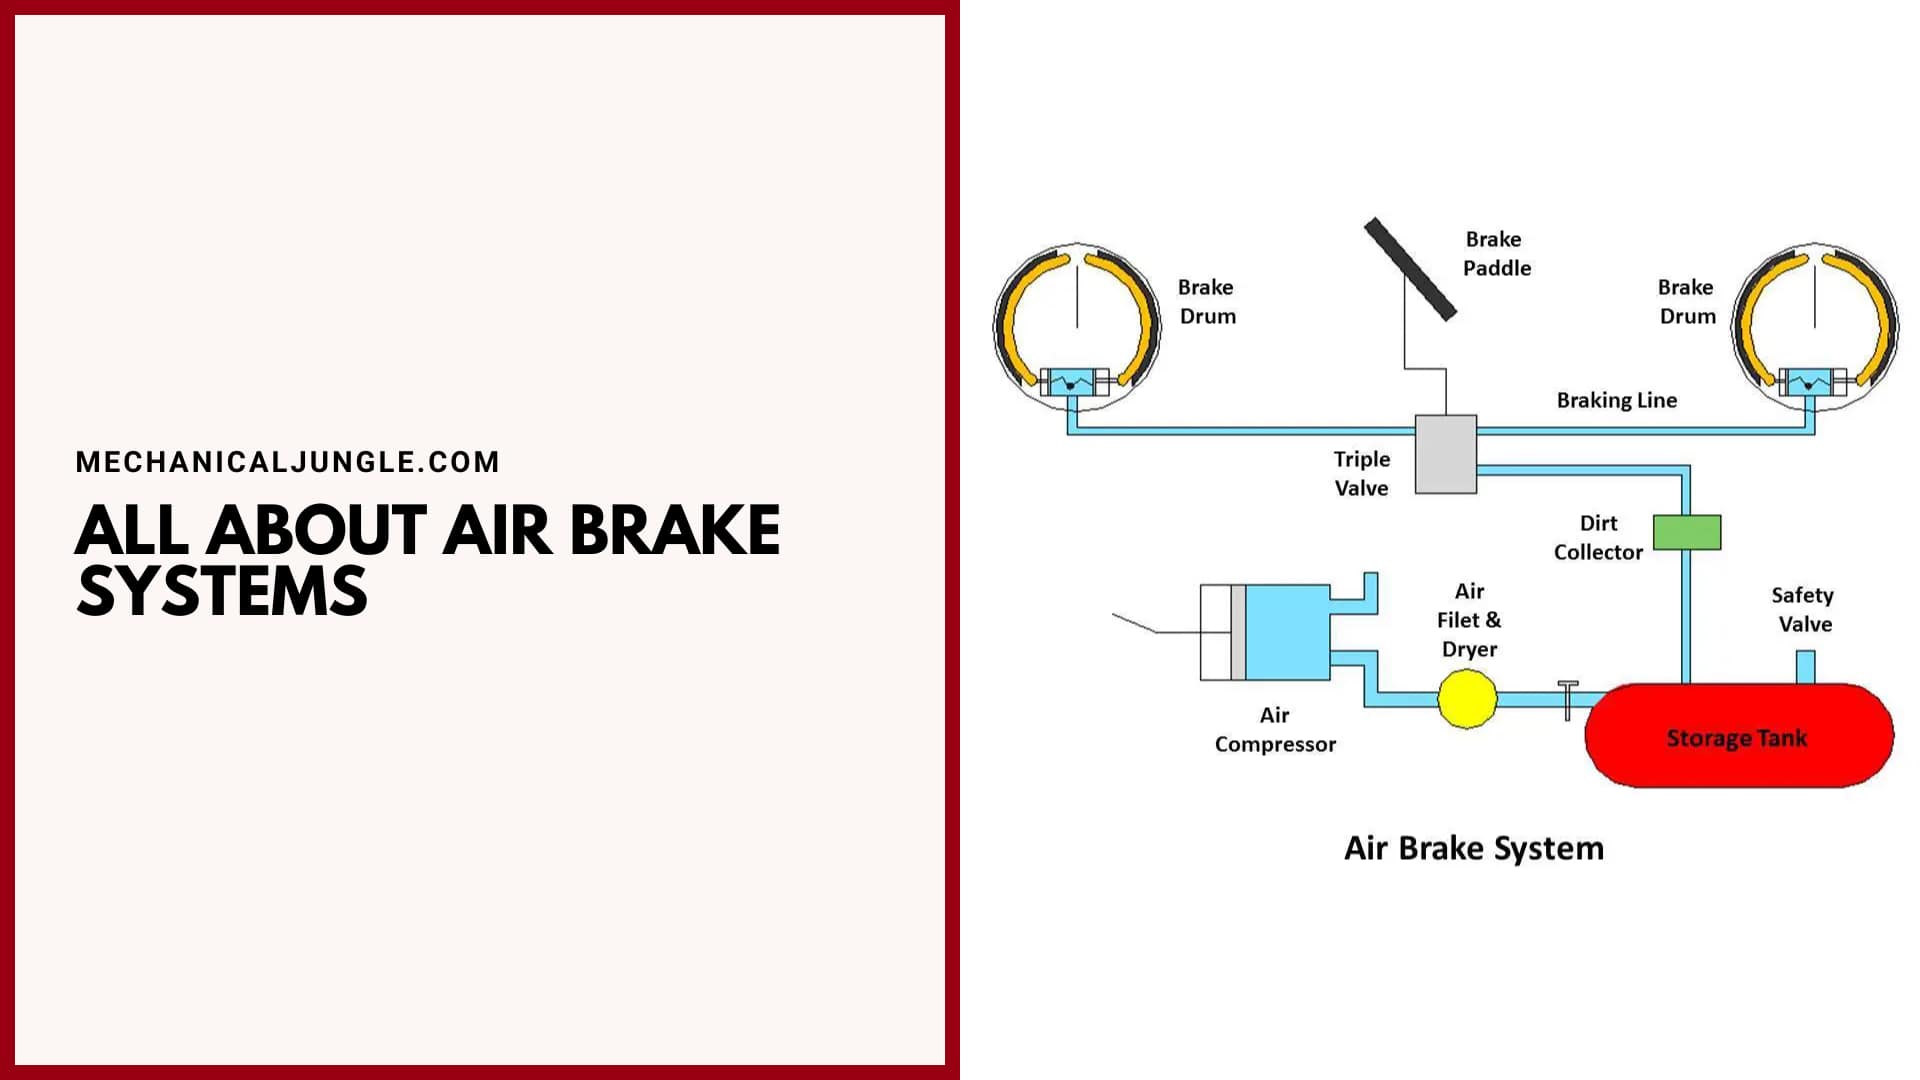 All About Air Brake Systems